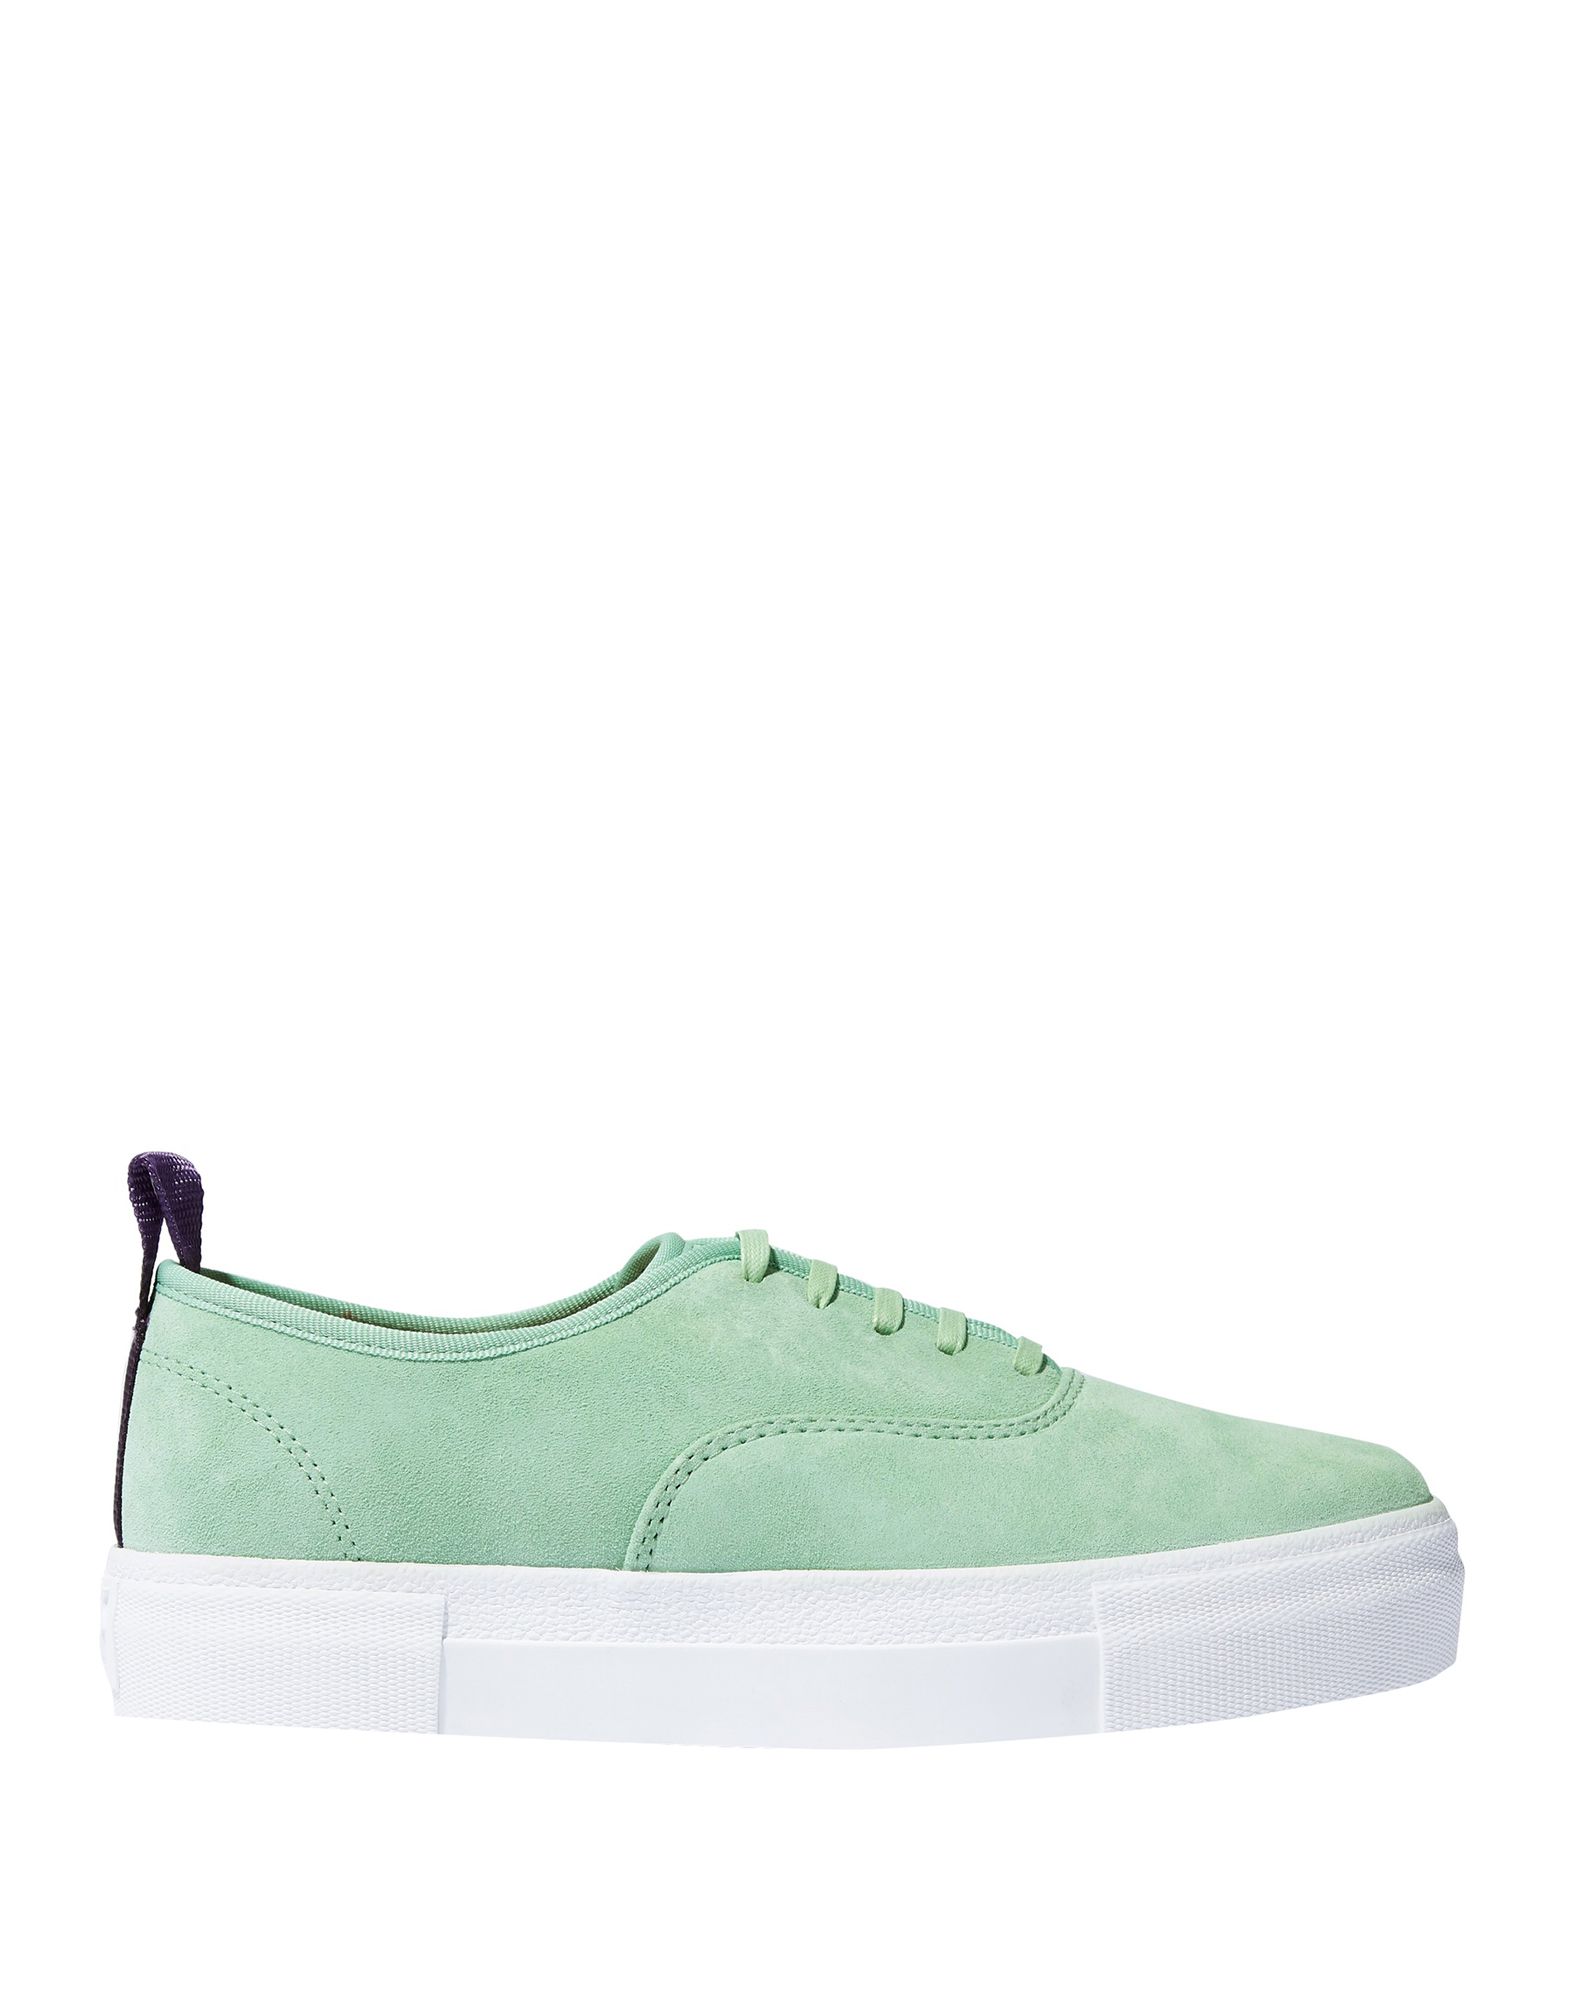 Shop Eytys Woman Sneakers Light Green Size 6 Soft Leather